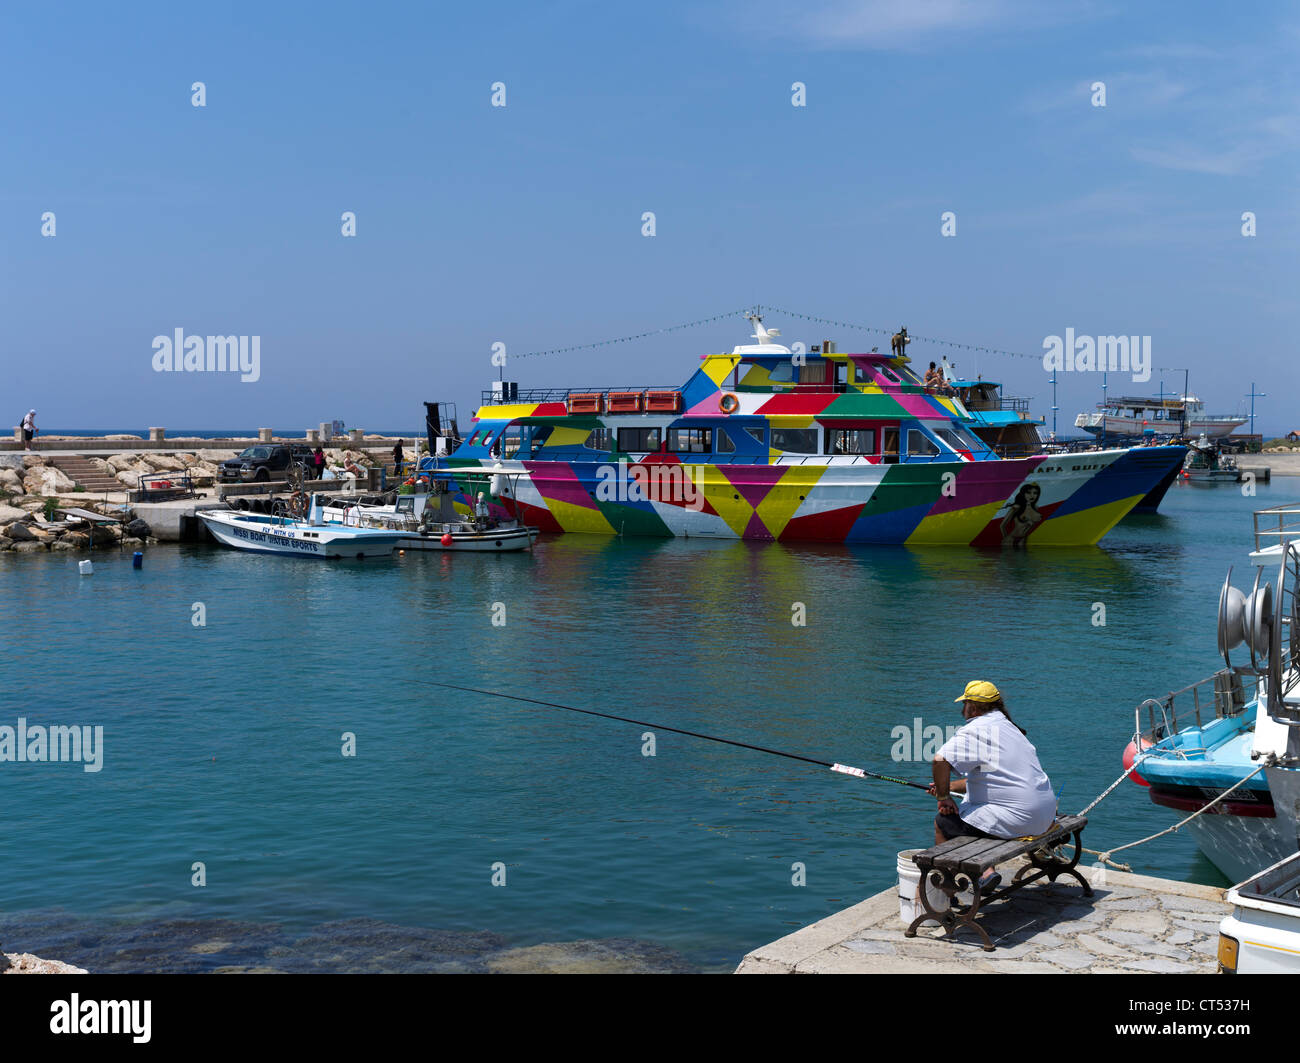 dh Liminaki harbour AYIA NAPA CYPRUS Cypriot angler fishing Tourist holiday party cruise boat people fish Stock Photo